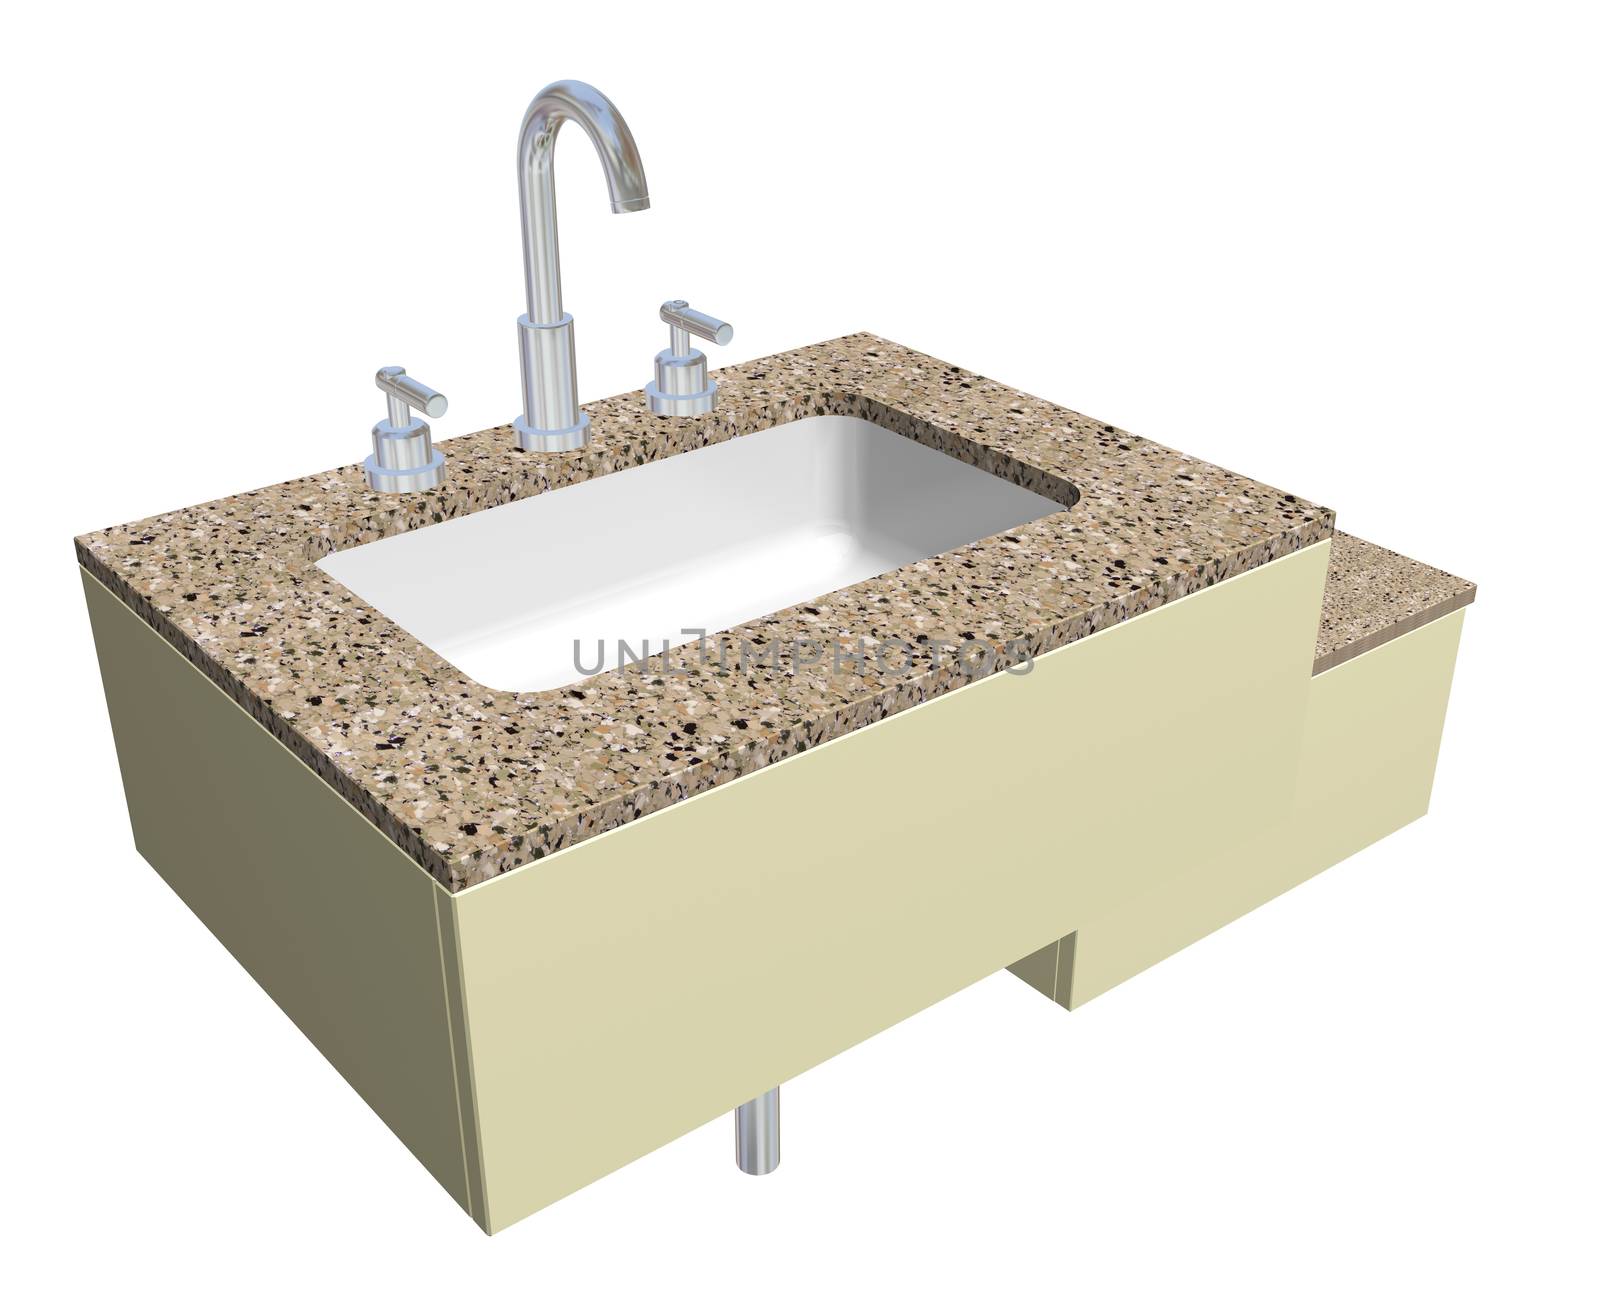 White built-in square bathroom sink with chrome faucet and plumbing fixtures, with a granite countertop, isolated against a white background. by Morphart